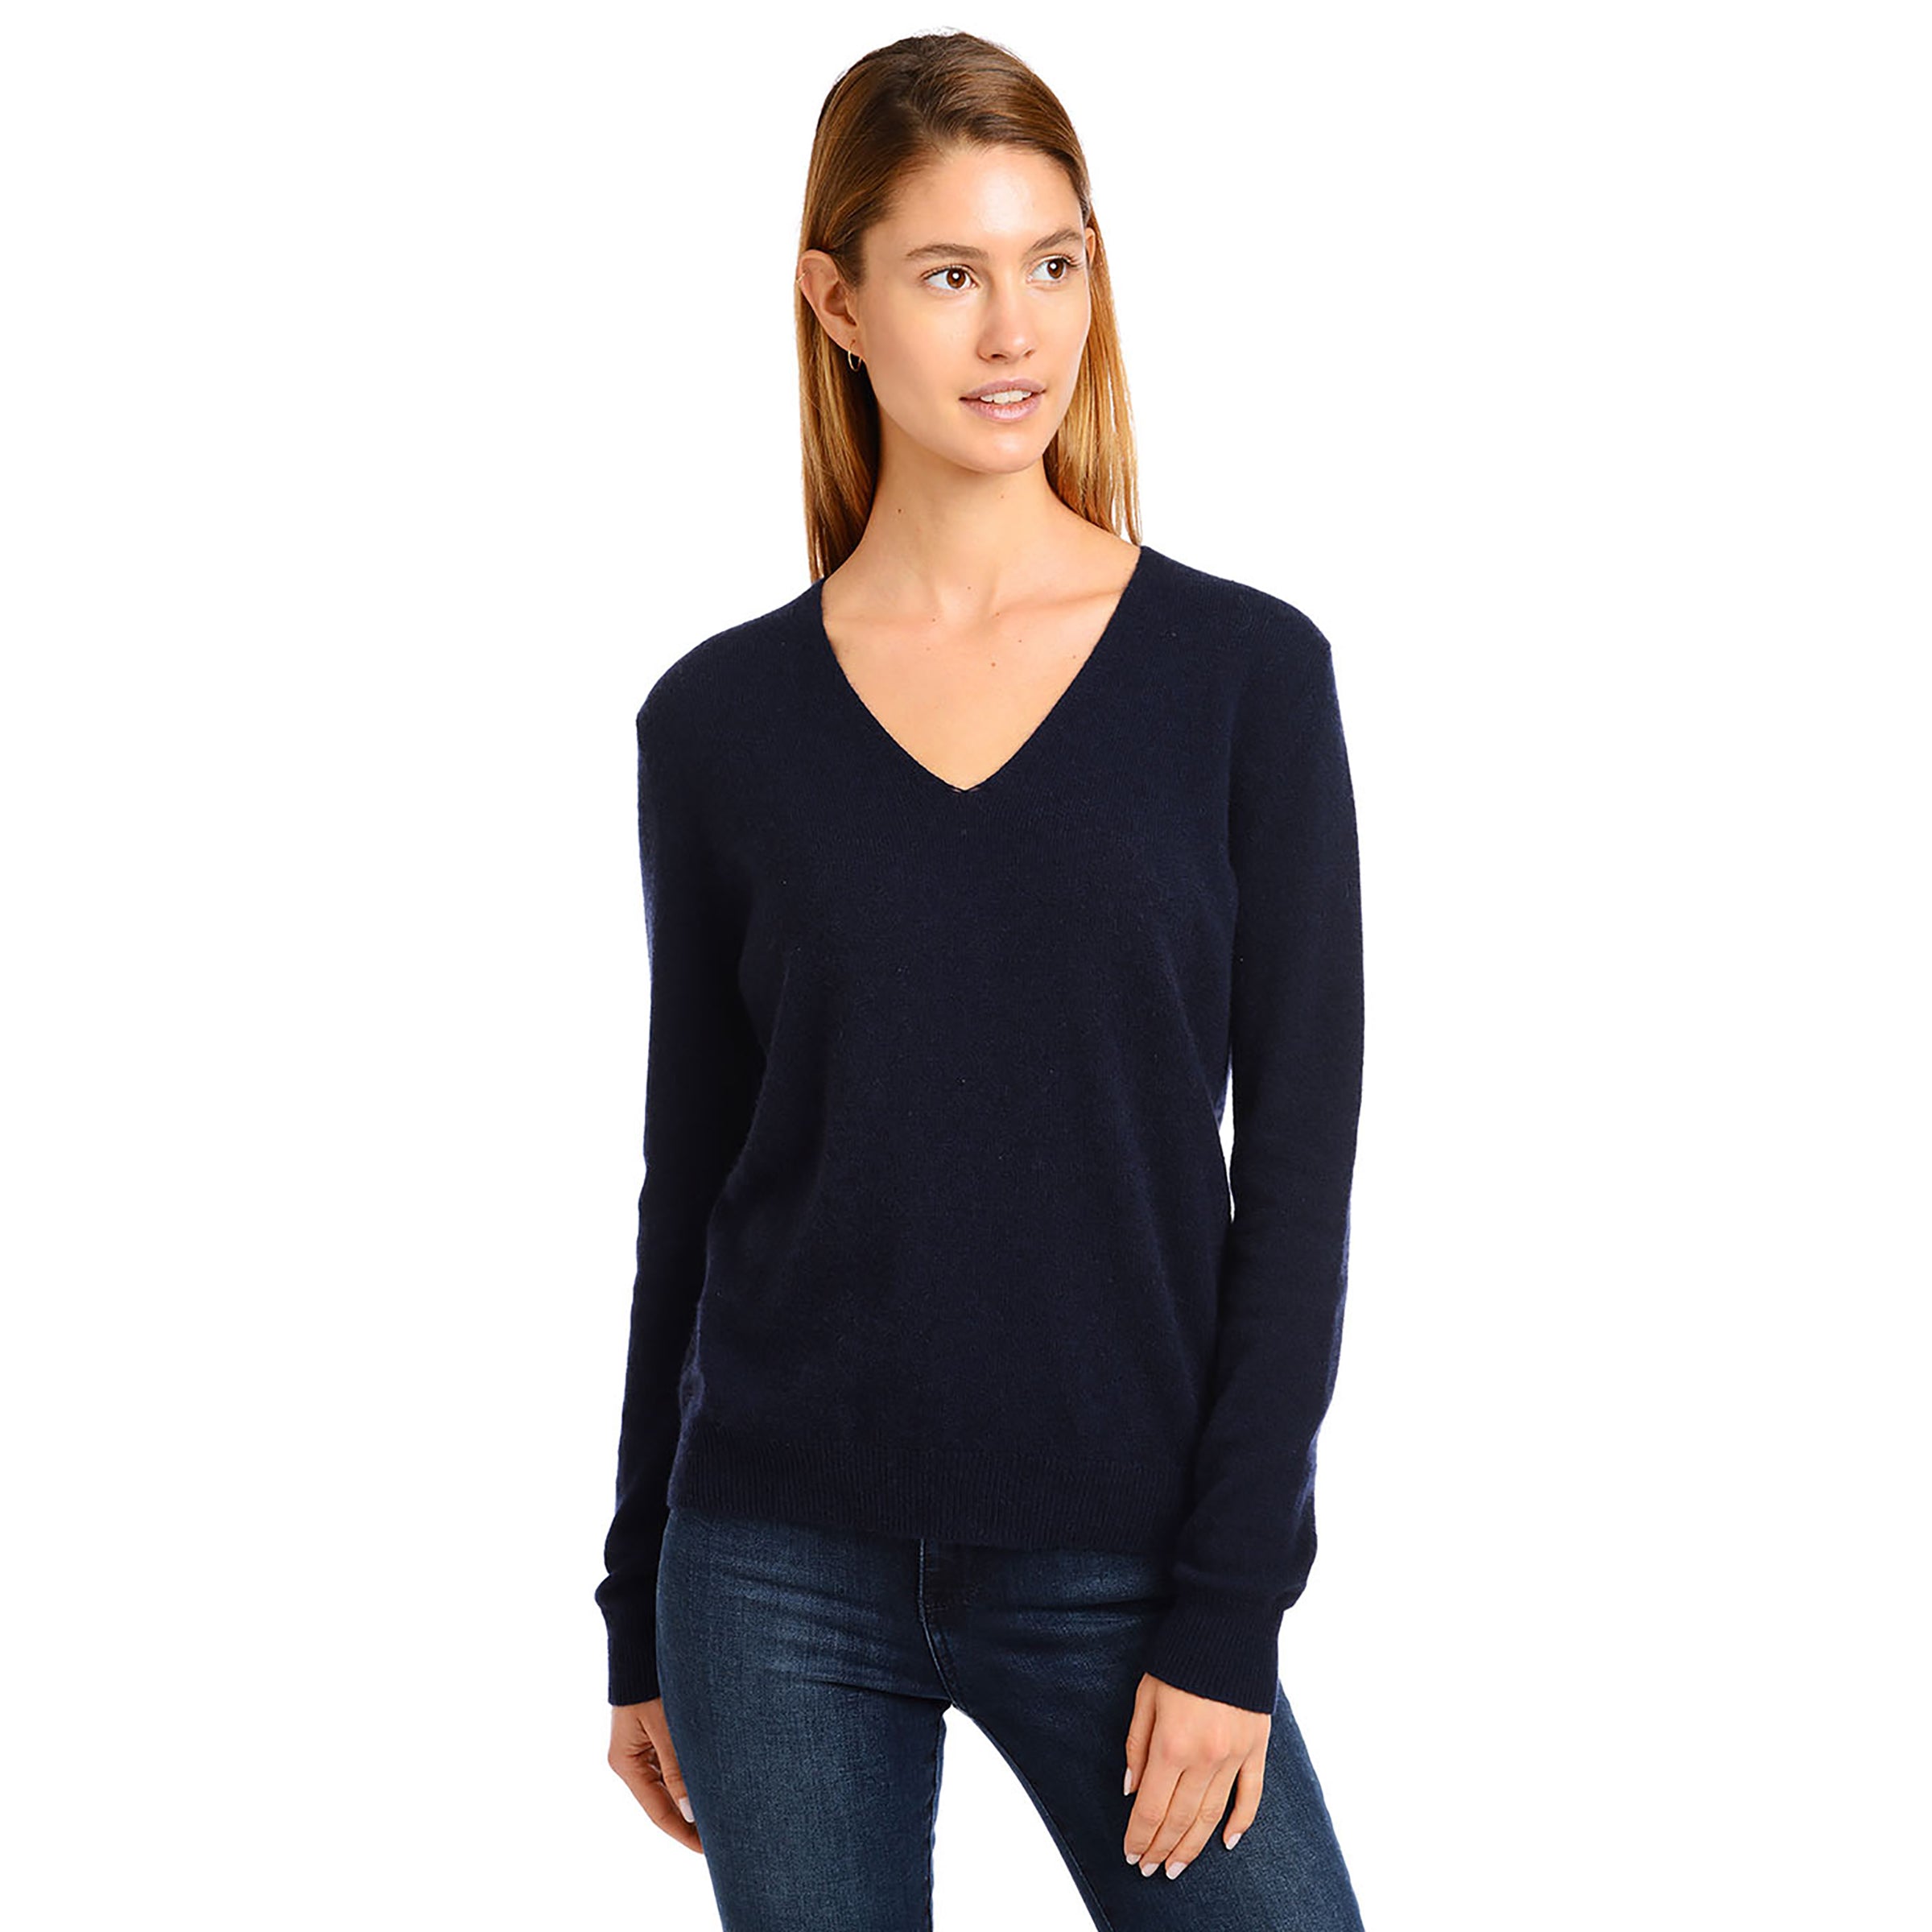 Women wearing Navy Cashmere Oversized V-Neck Willow Sweater